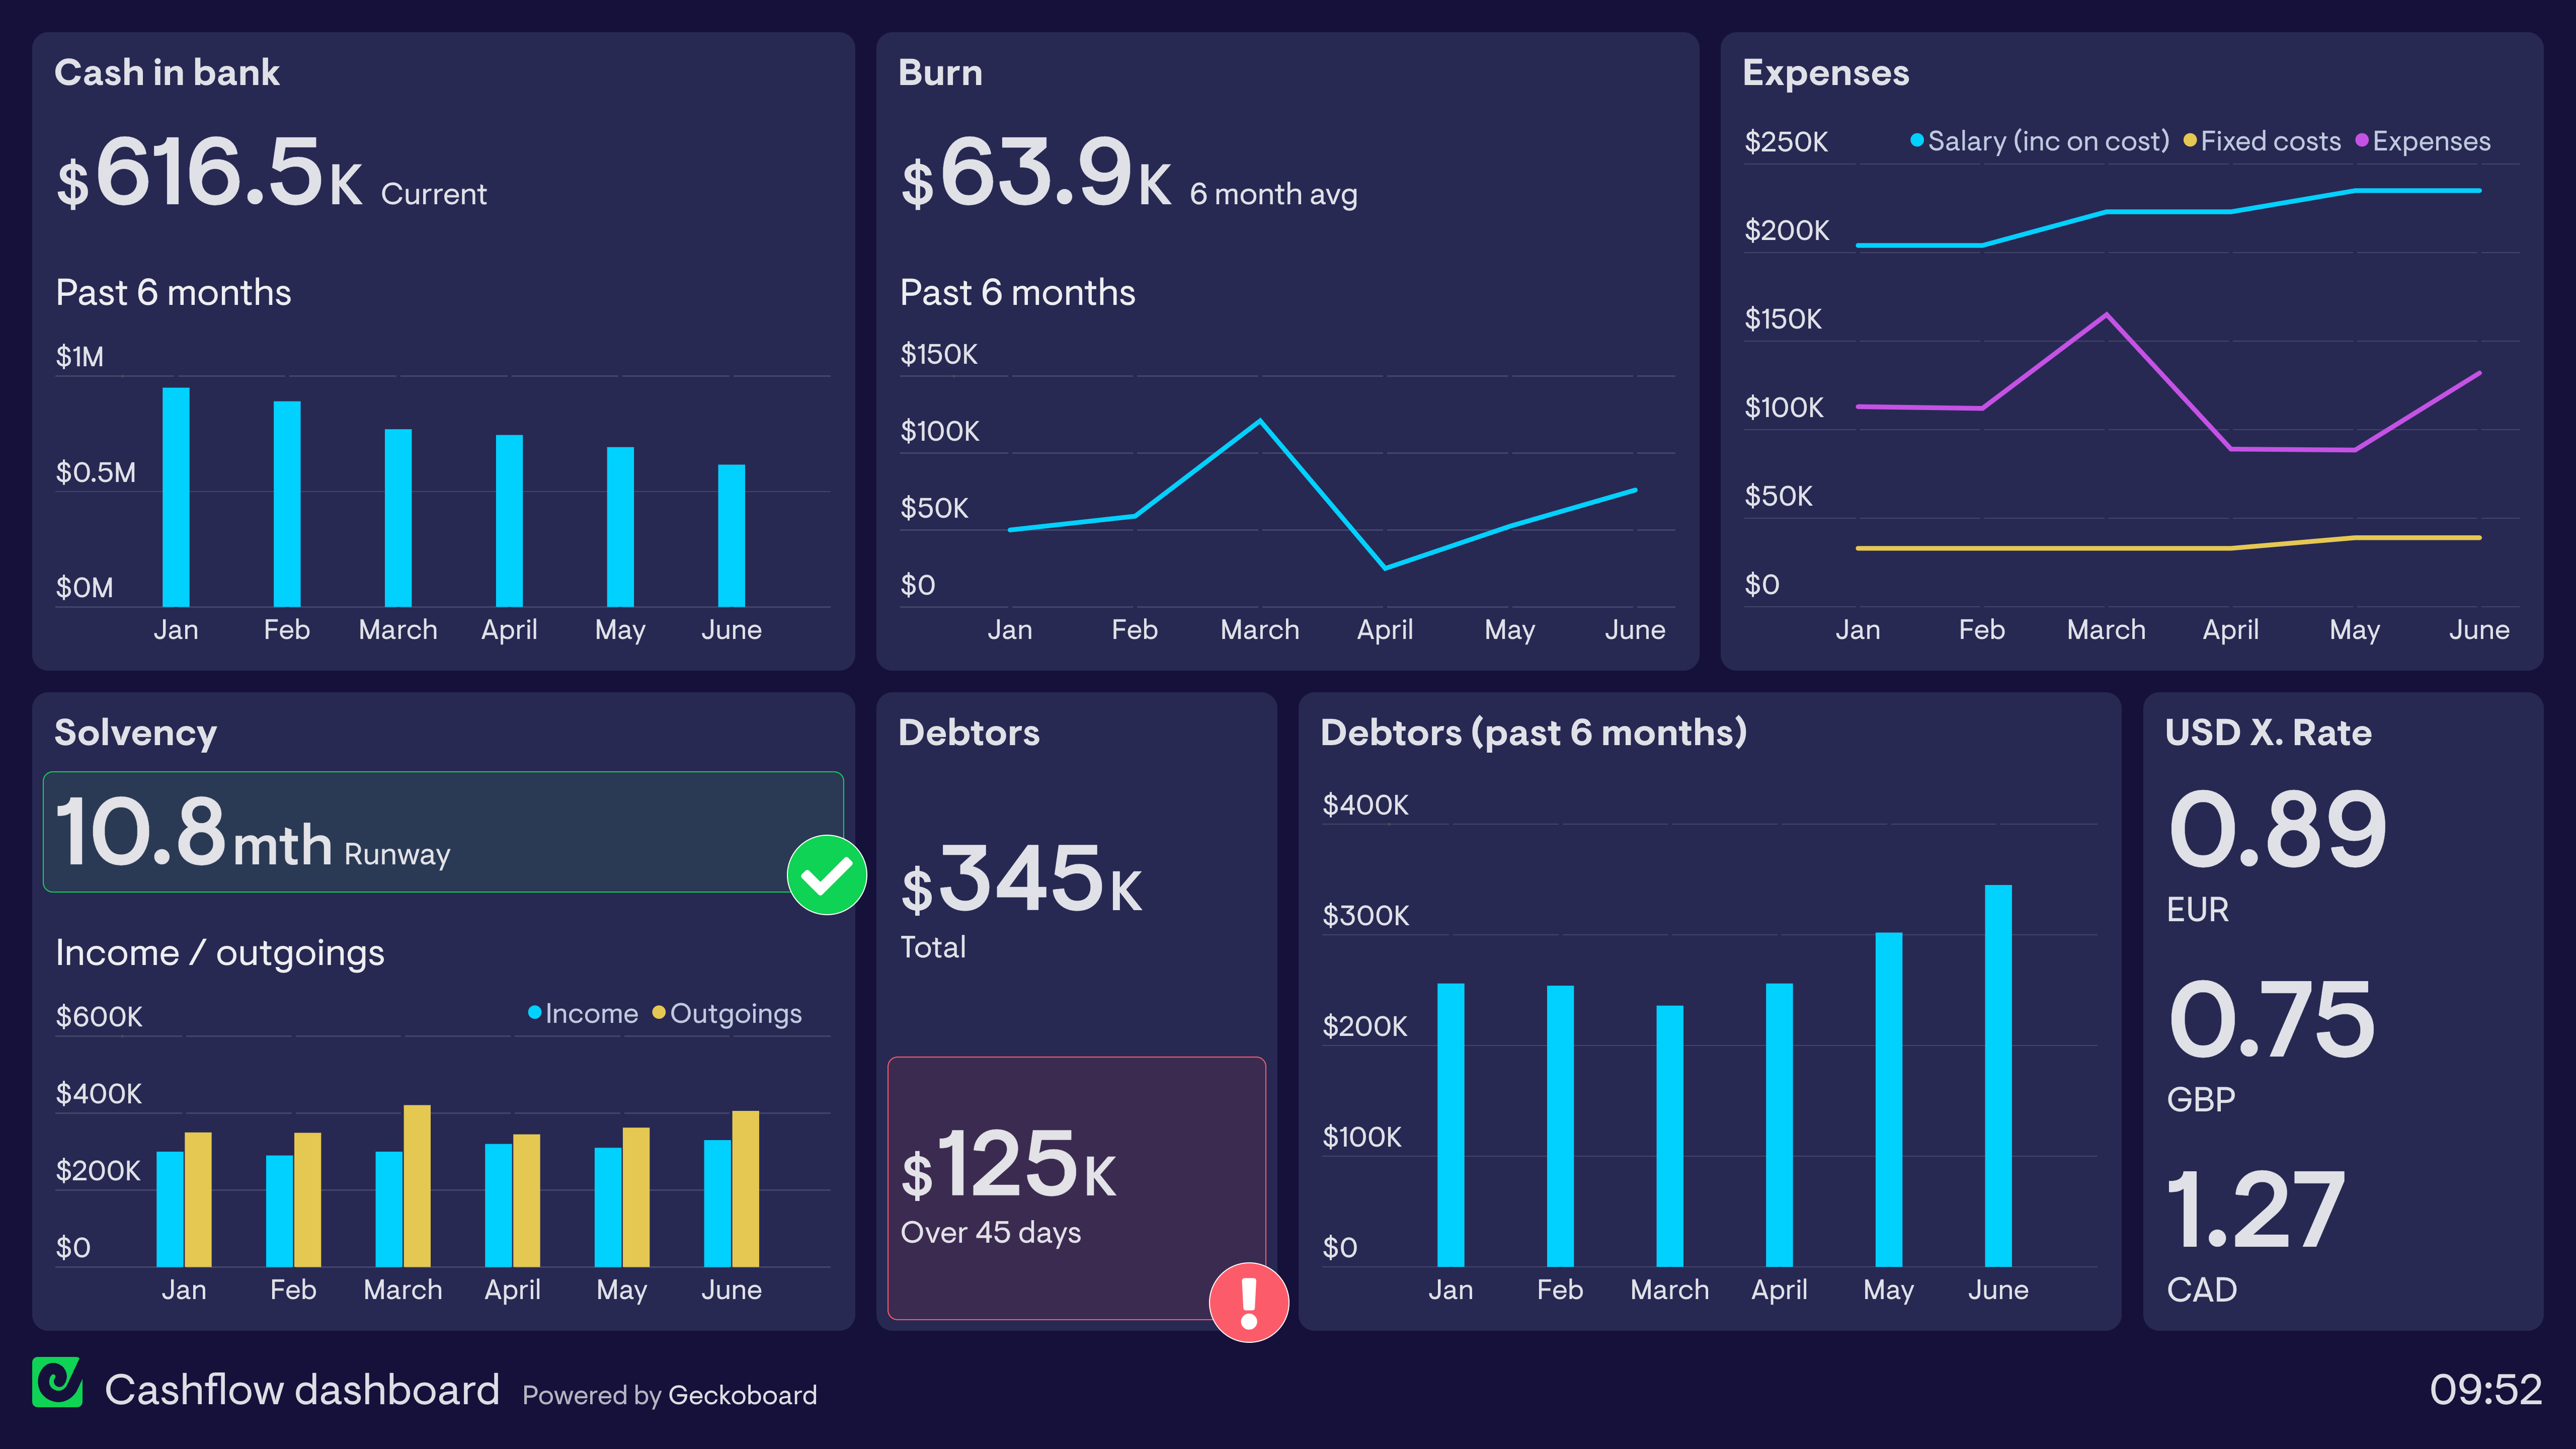 Example of a dashboard used to track cash flow and spending